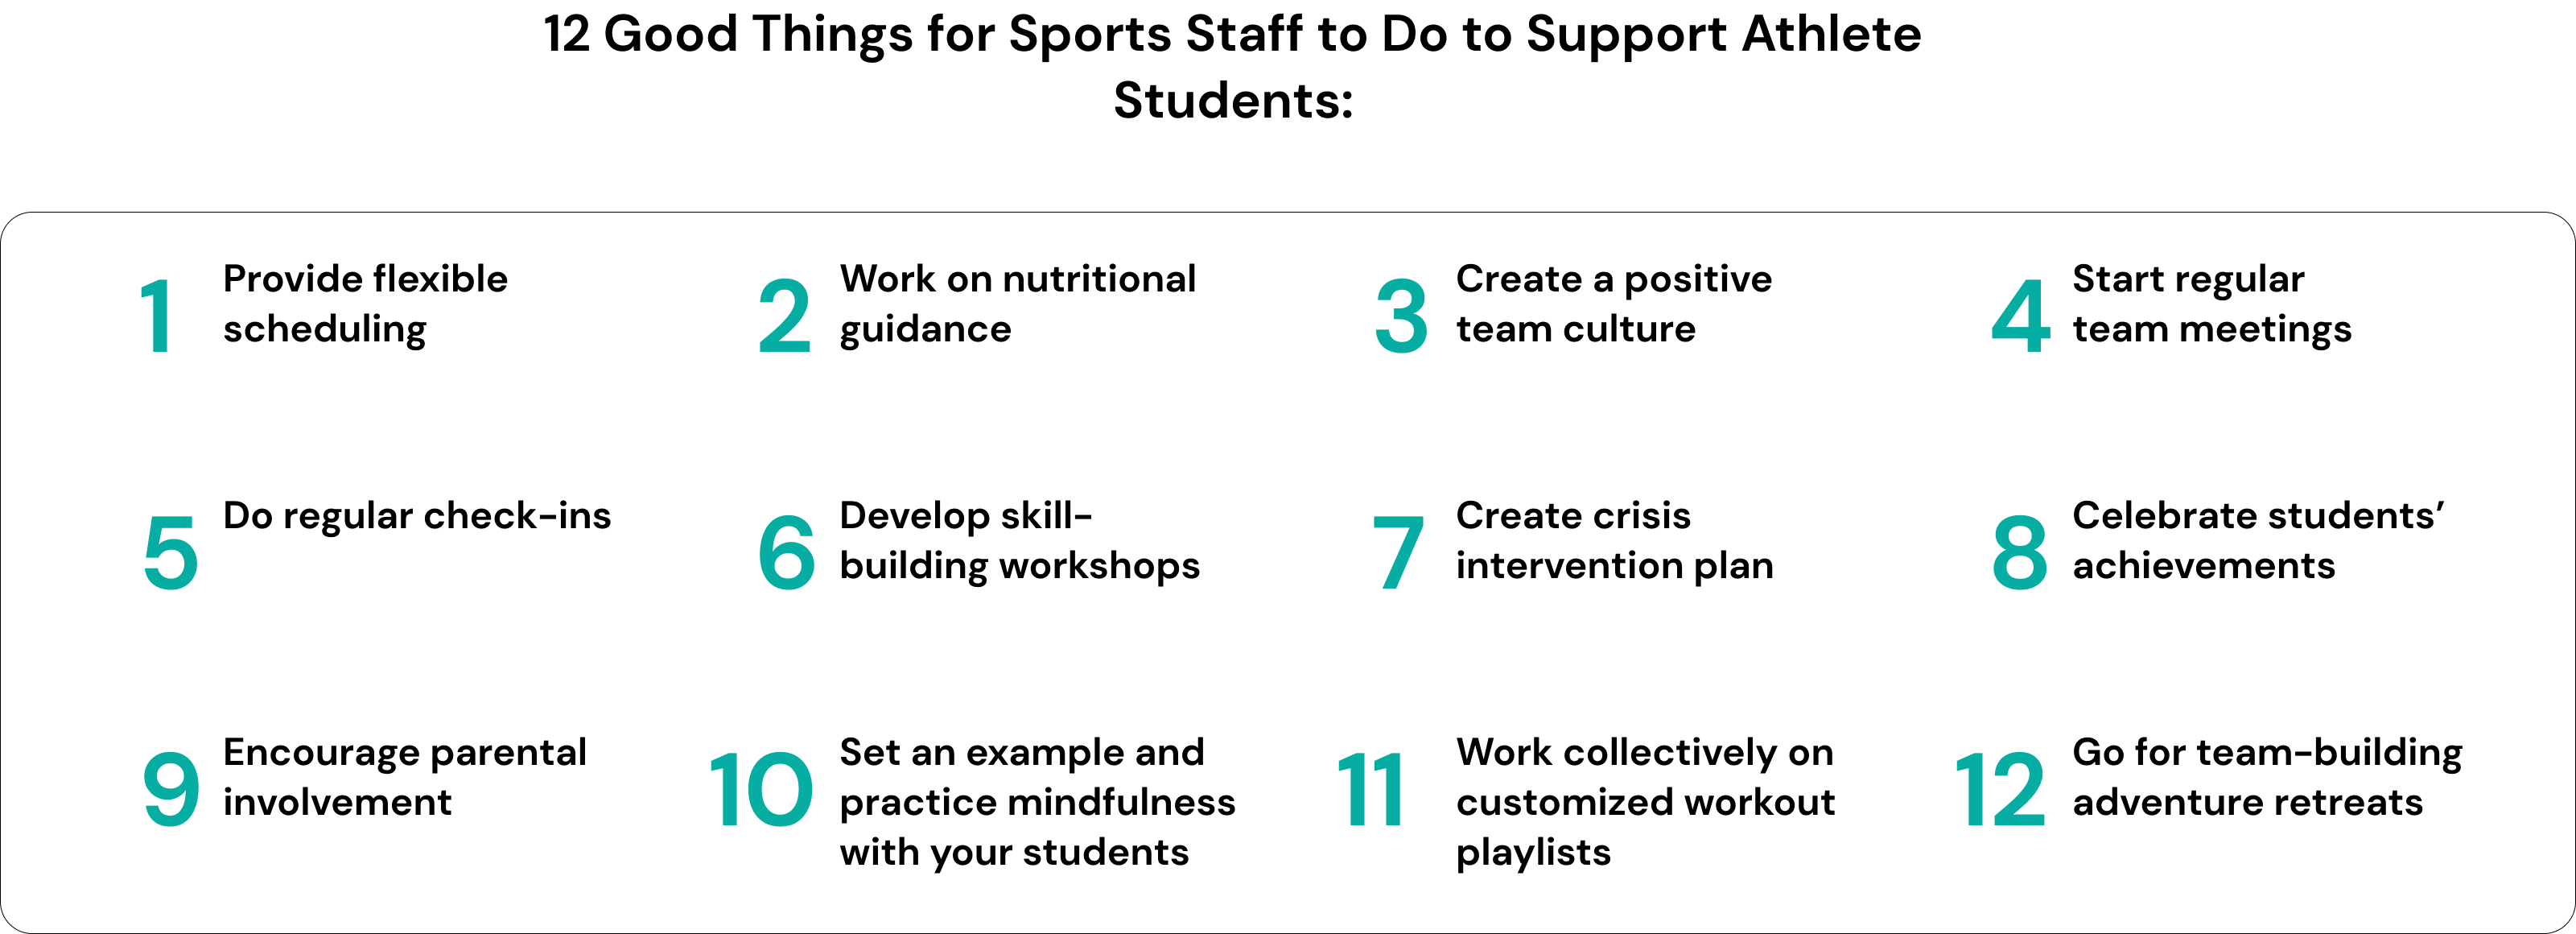 12 Good Things for Sports Staff to Do to Support Athlete Students